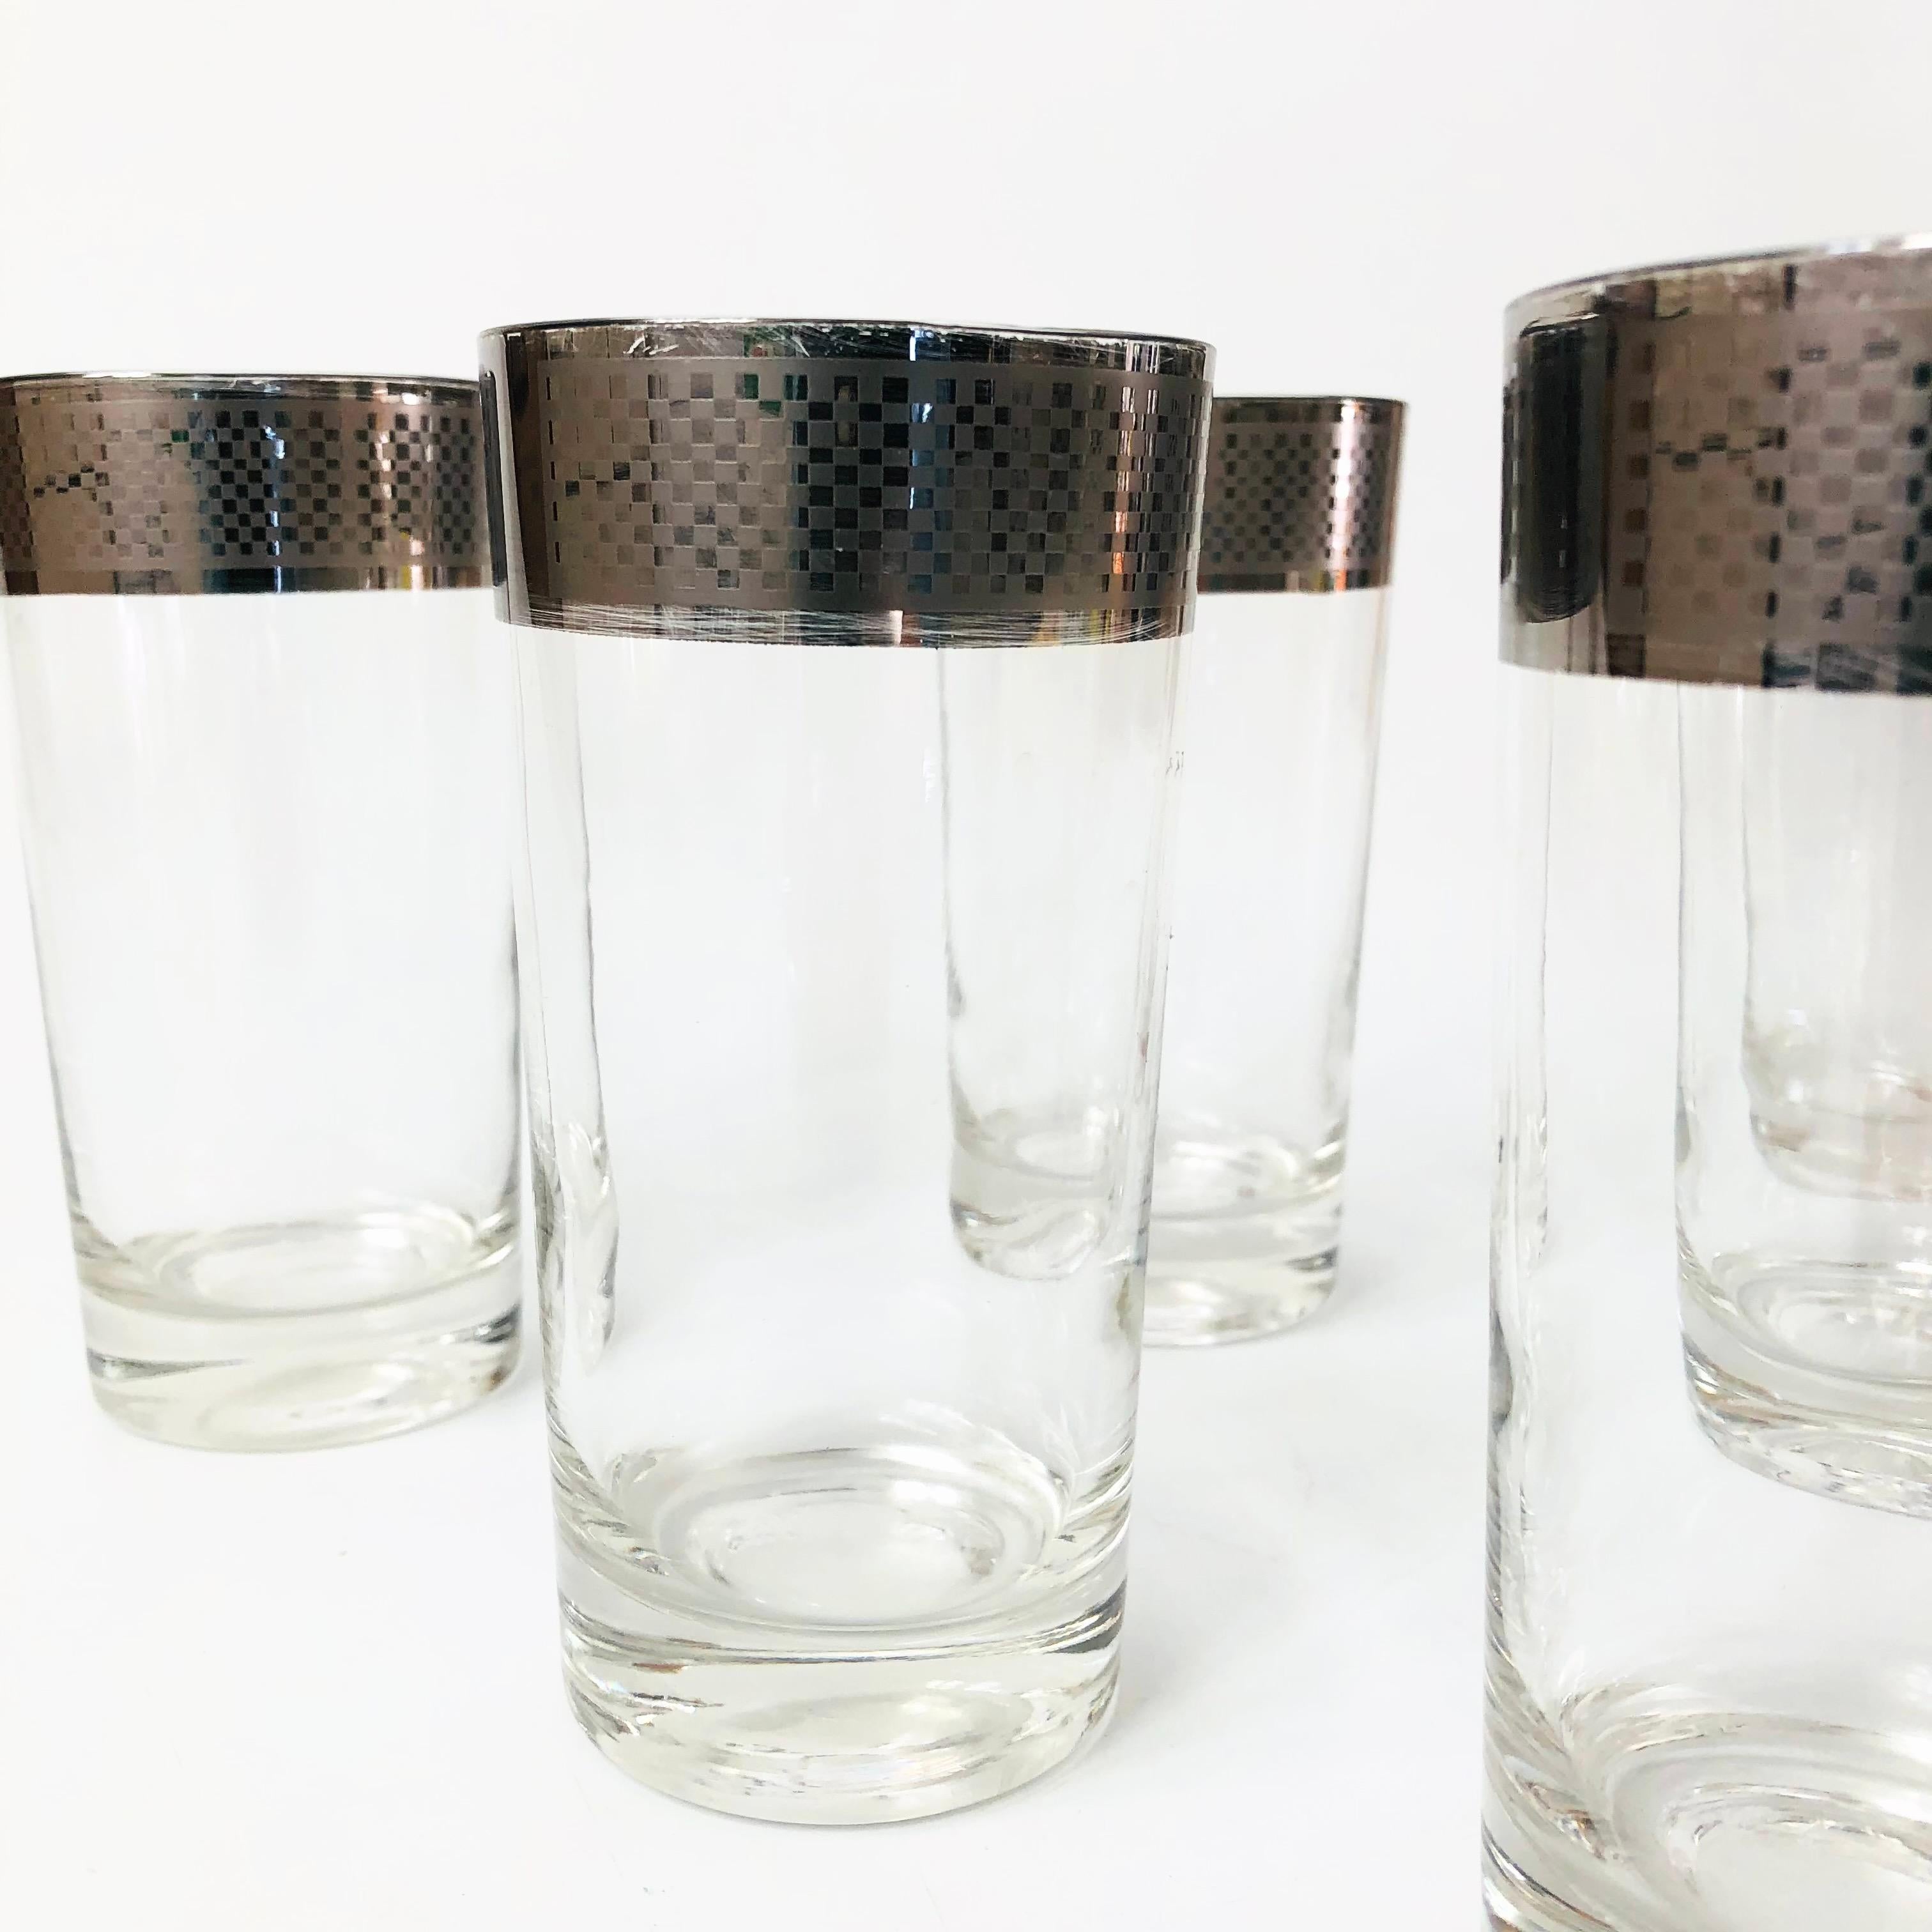 American Mid Century Checkered Silver Rim Tumblers - Set of 6 For Sale